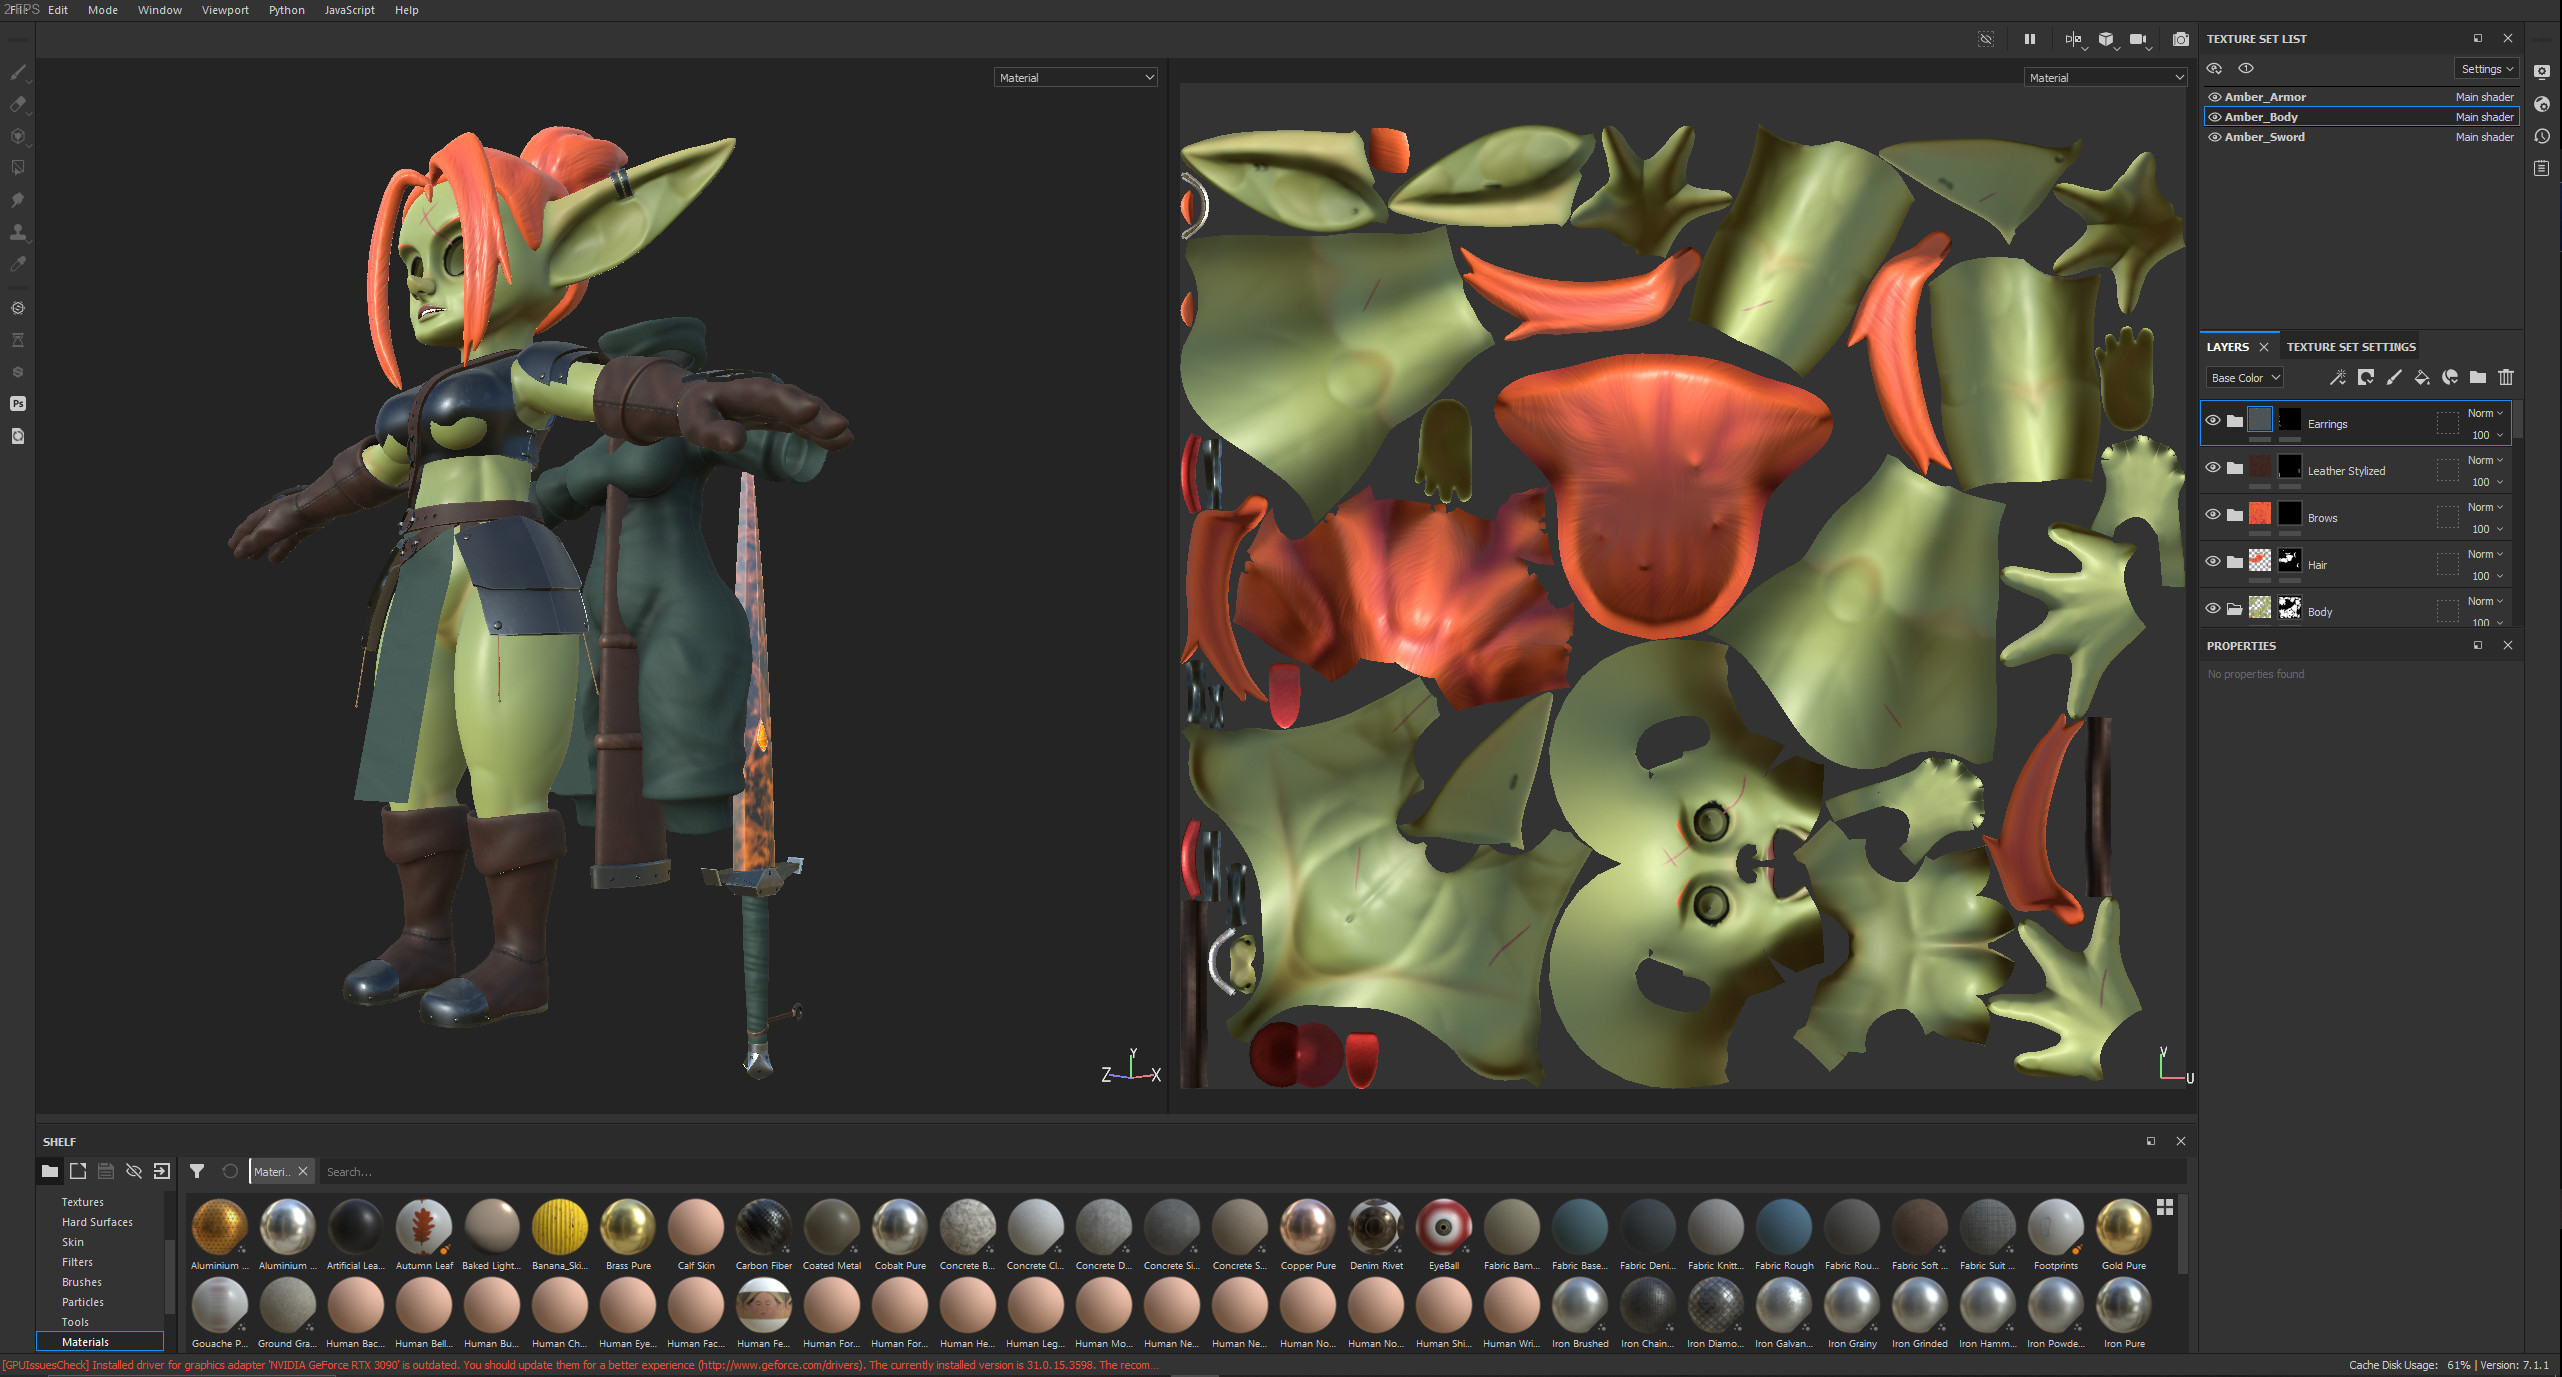 In Substance Painter